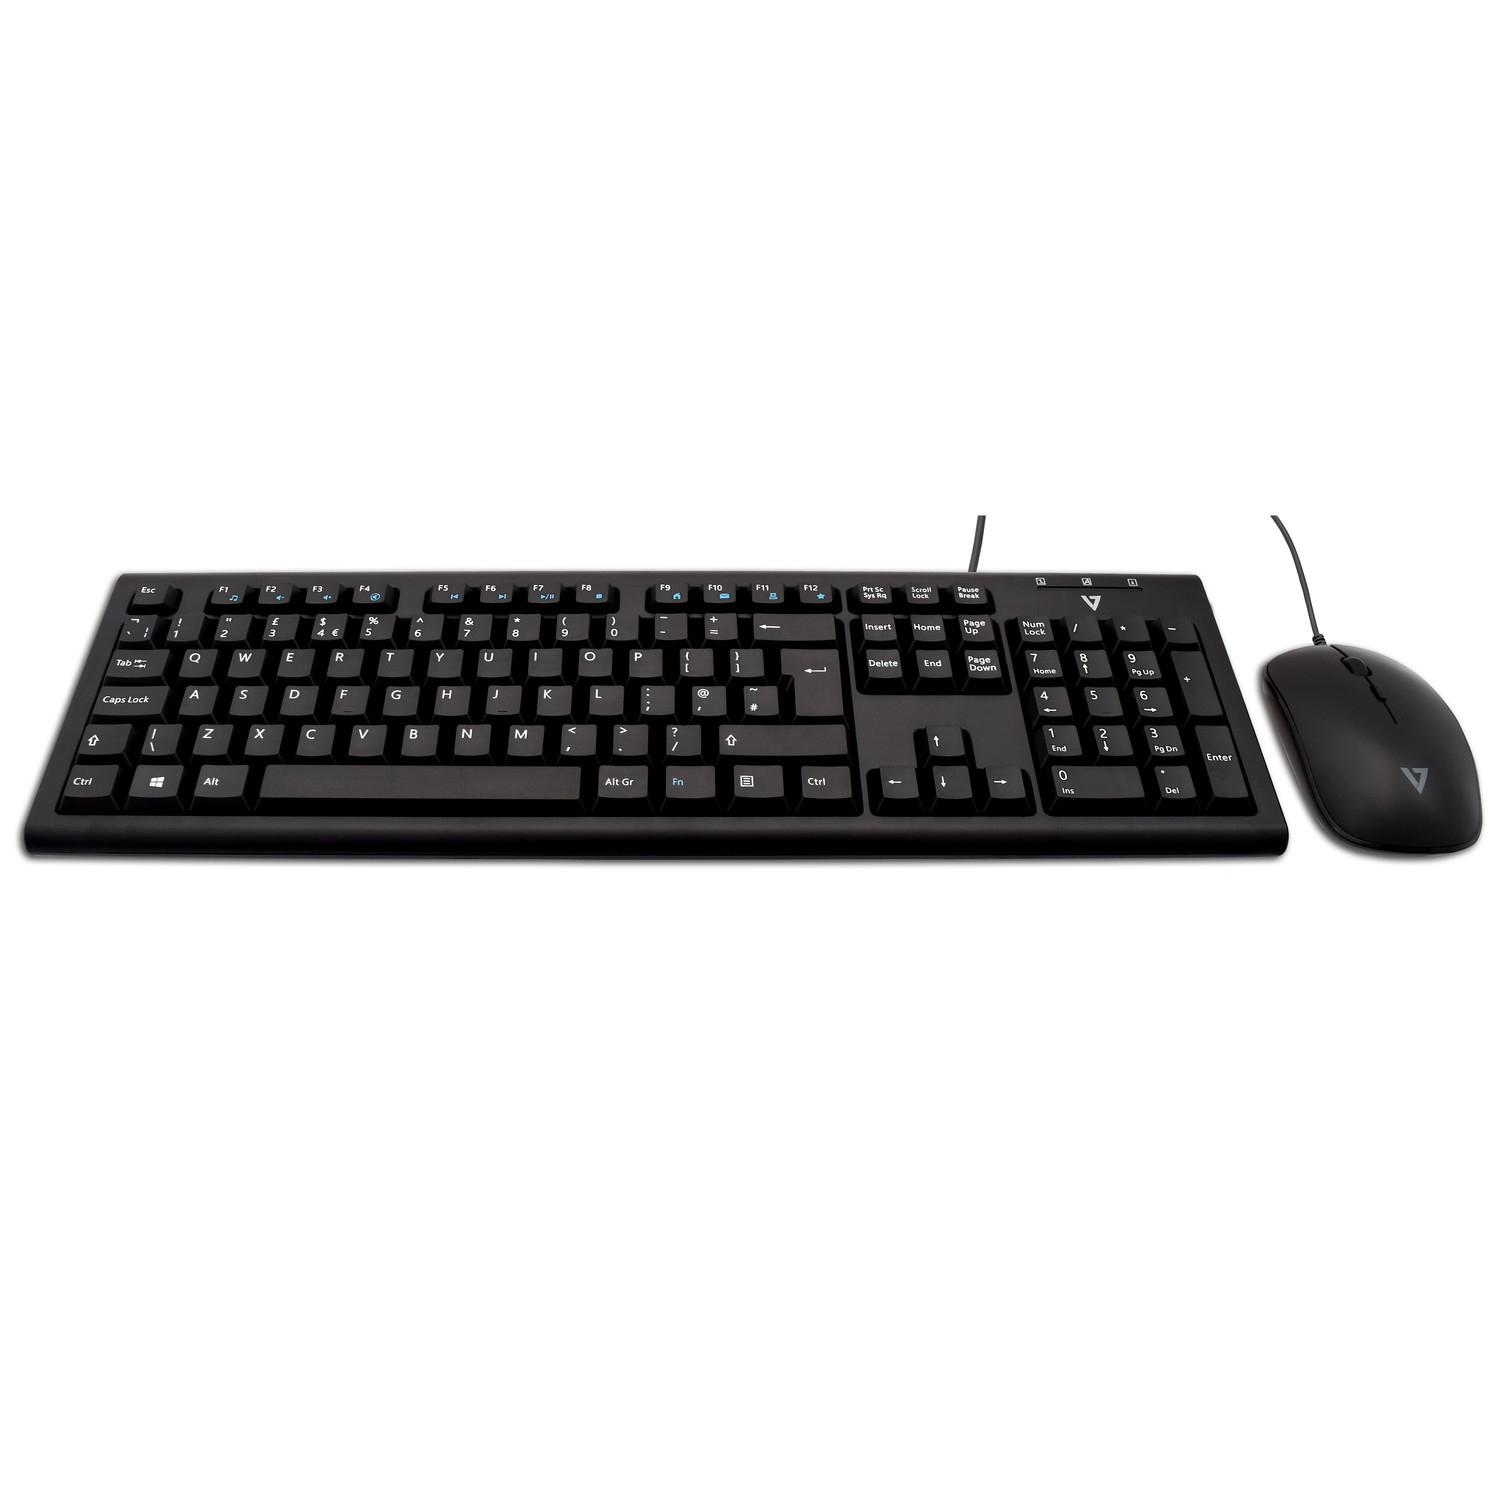 V7 Wired Keyboard and Mouse Combo &acirc;&euro;&ldquo; UK